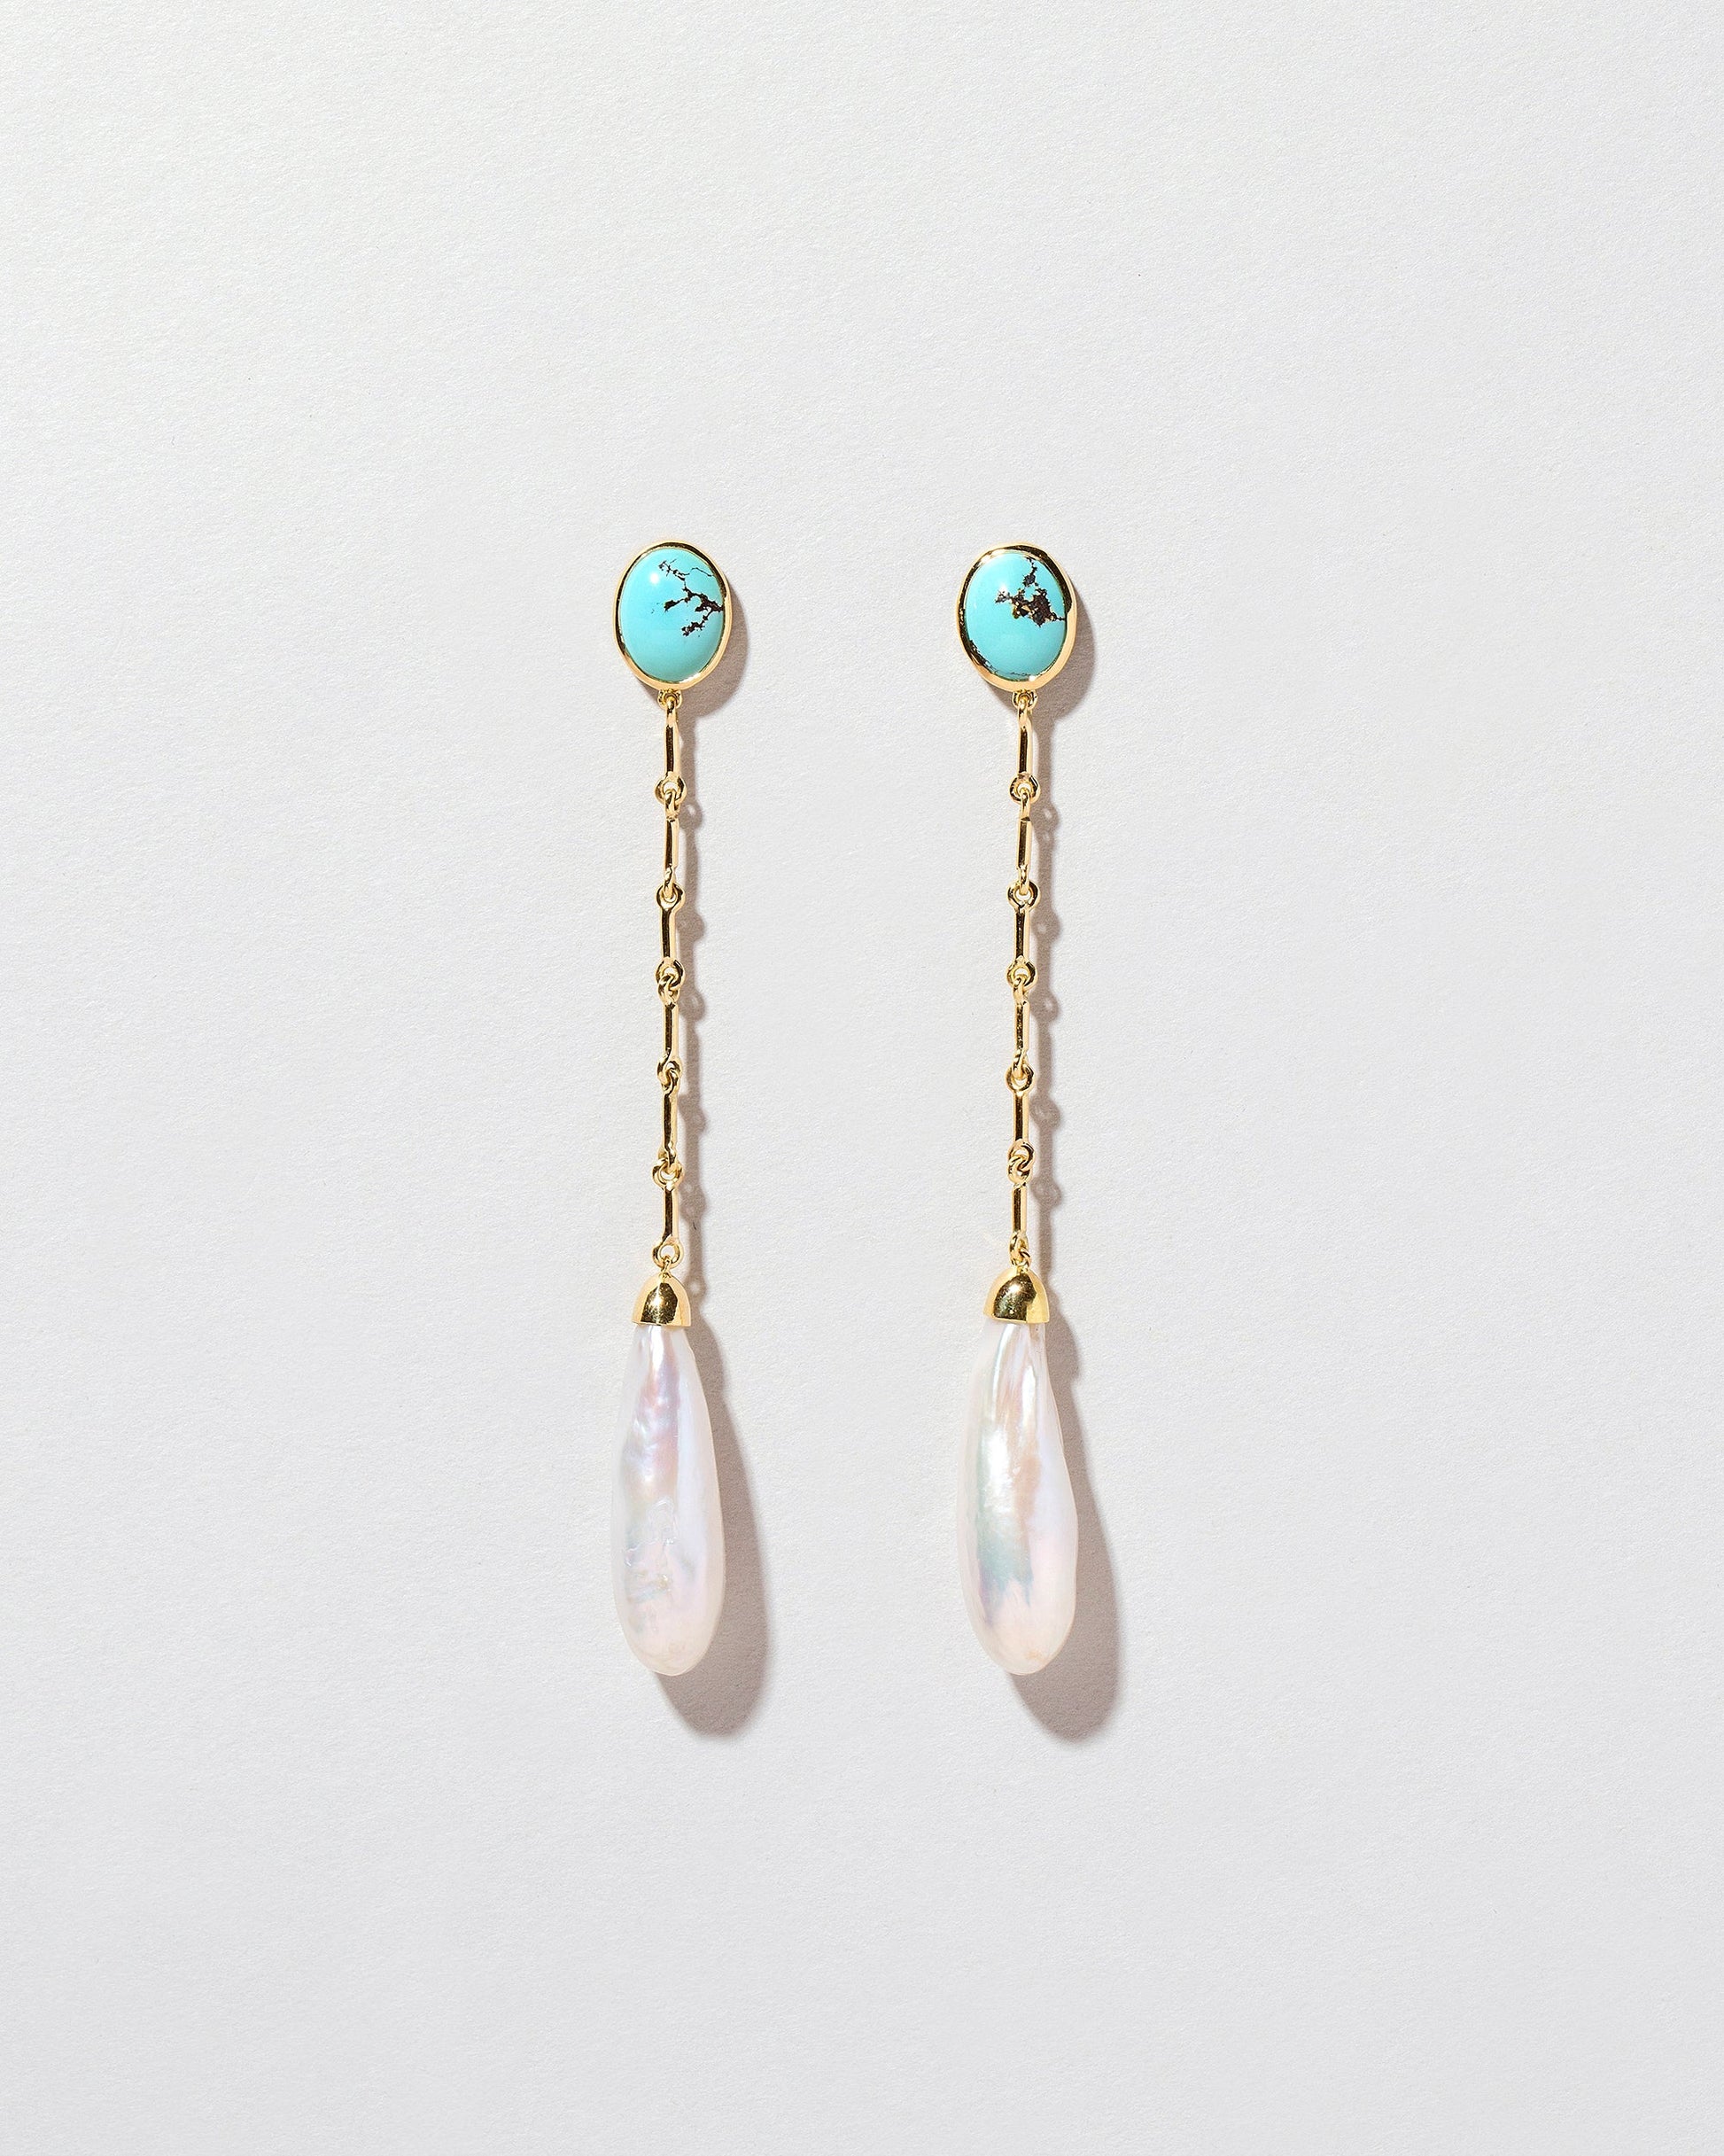  Pearl & Turquoise Shoulder Dusters on light color background.